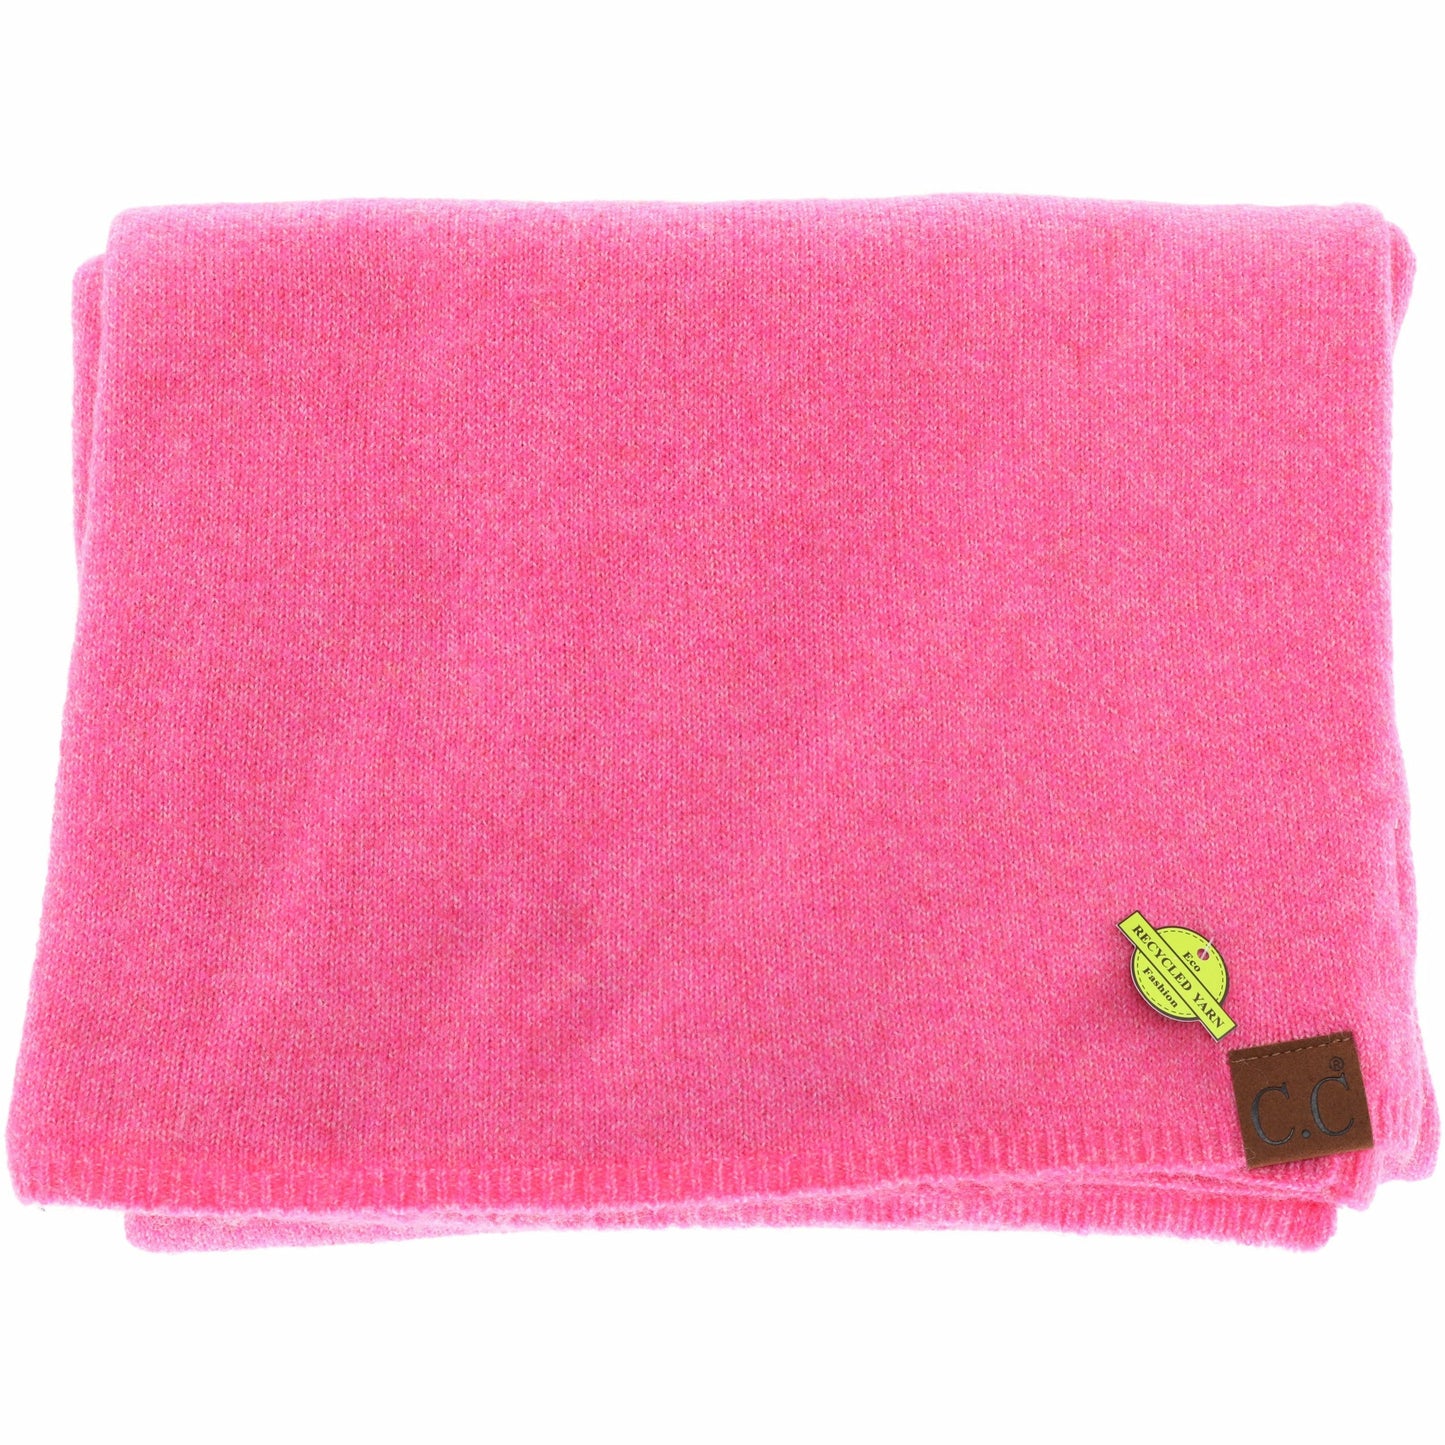 SALE CC BEANIE SOFT RIBBED SCARF MULTIPLE COLORS